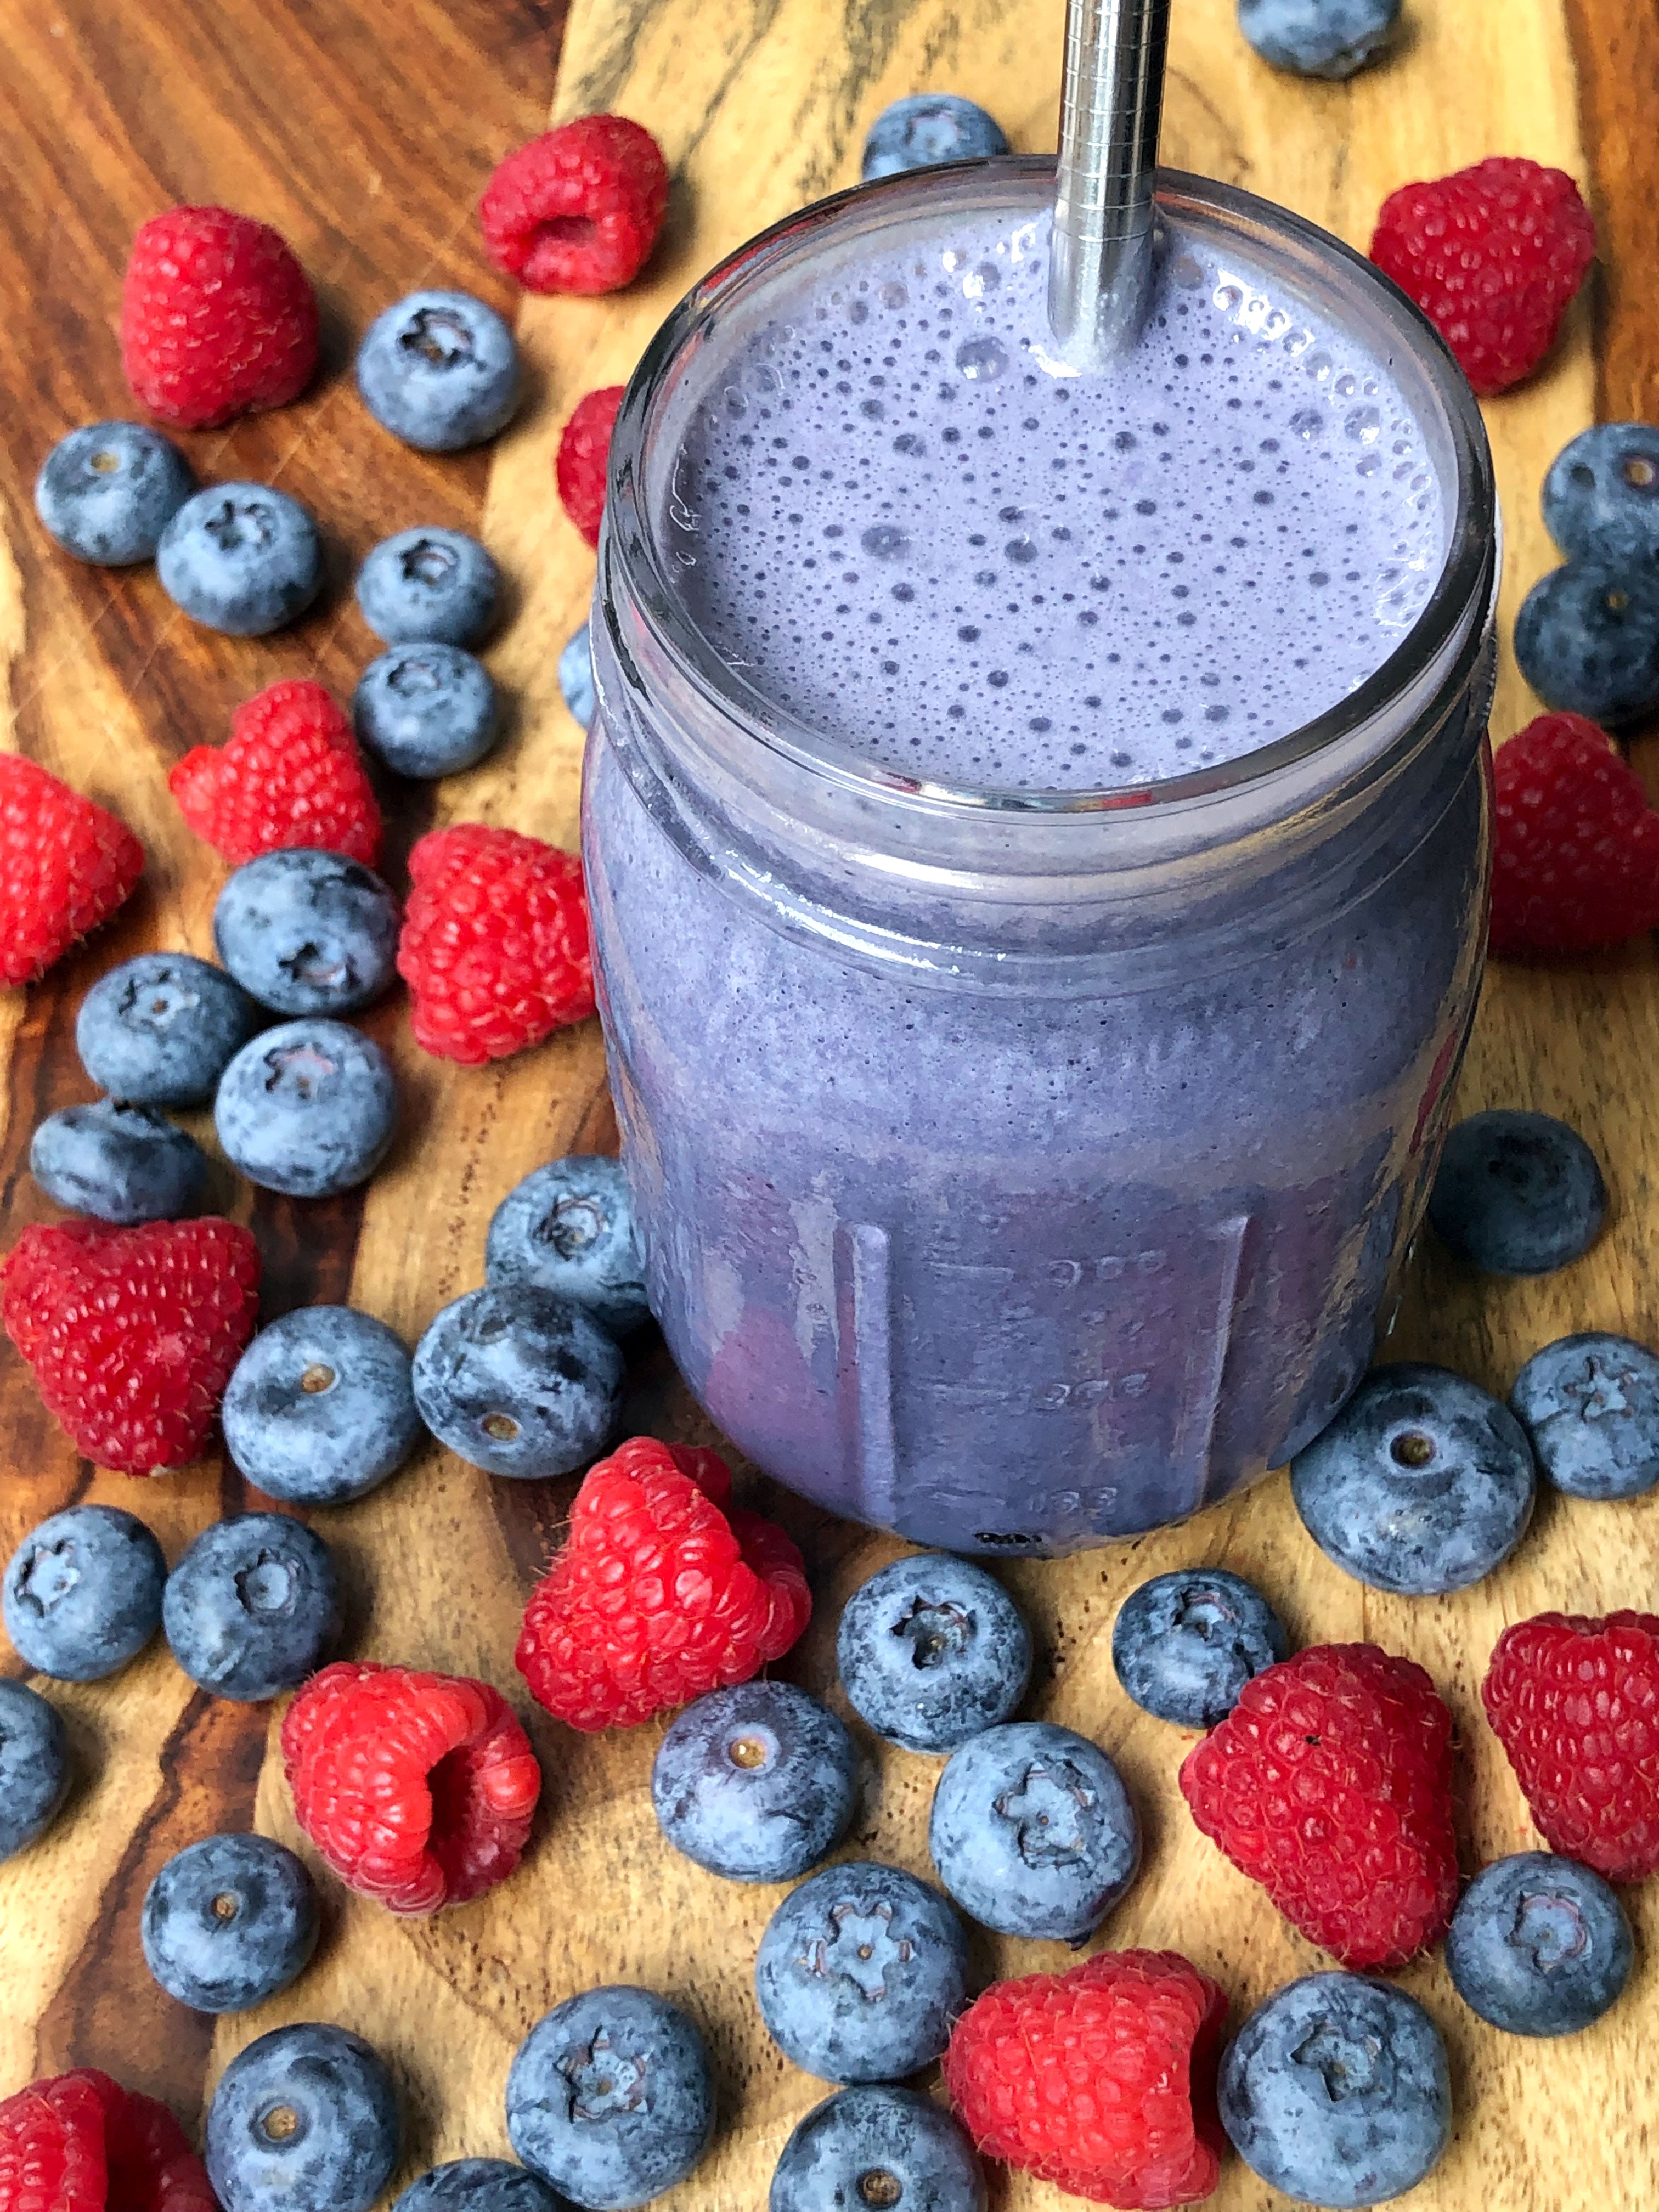 Weight Loss: 20 Proven Smoothie Recipes For Weight Loss, Health